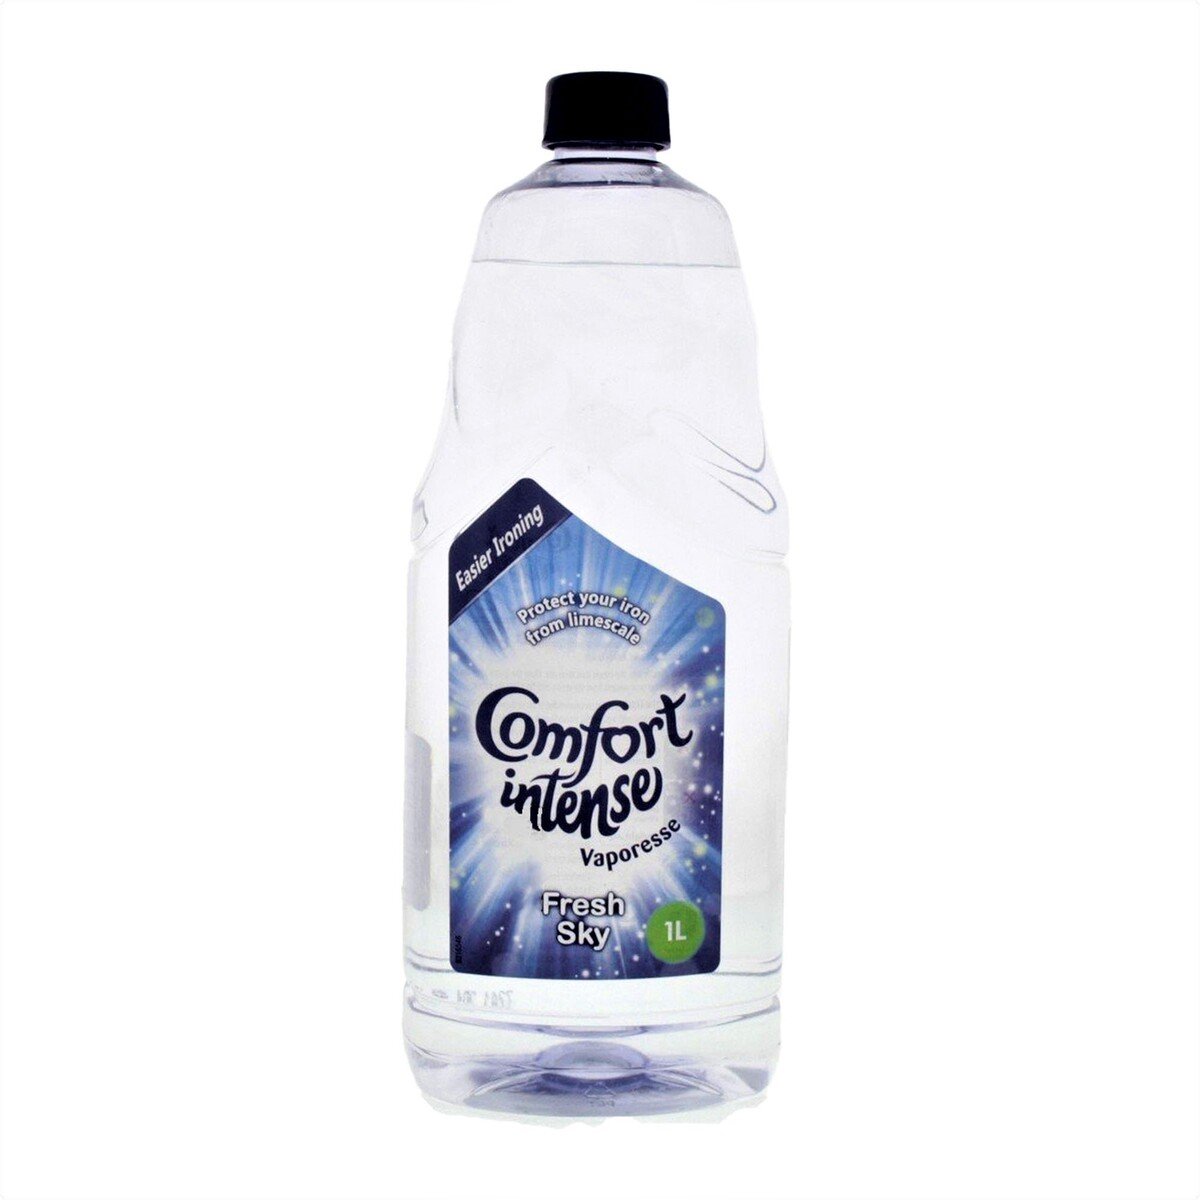 Buy Comfort Intense Vaporesse Fresh Sky Iron Water Blue 1 Litre Online at Best Price | Fabric softener concentrate | Lulu Kuwait in Kuwait